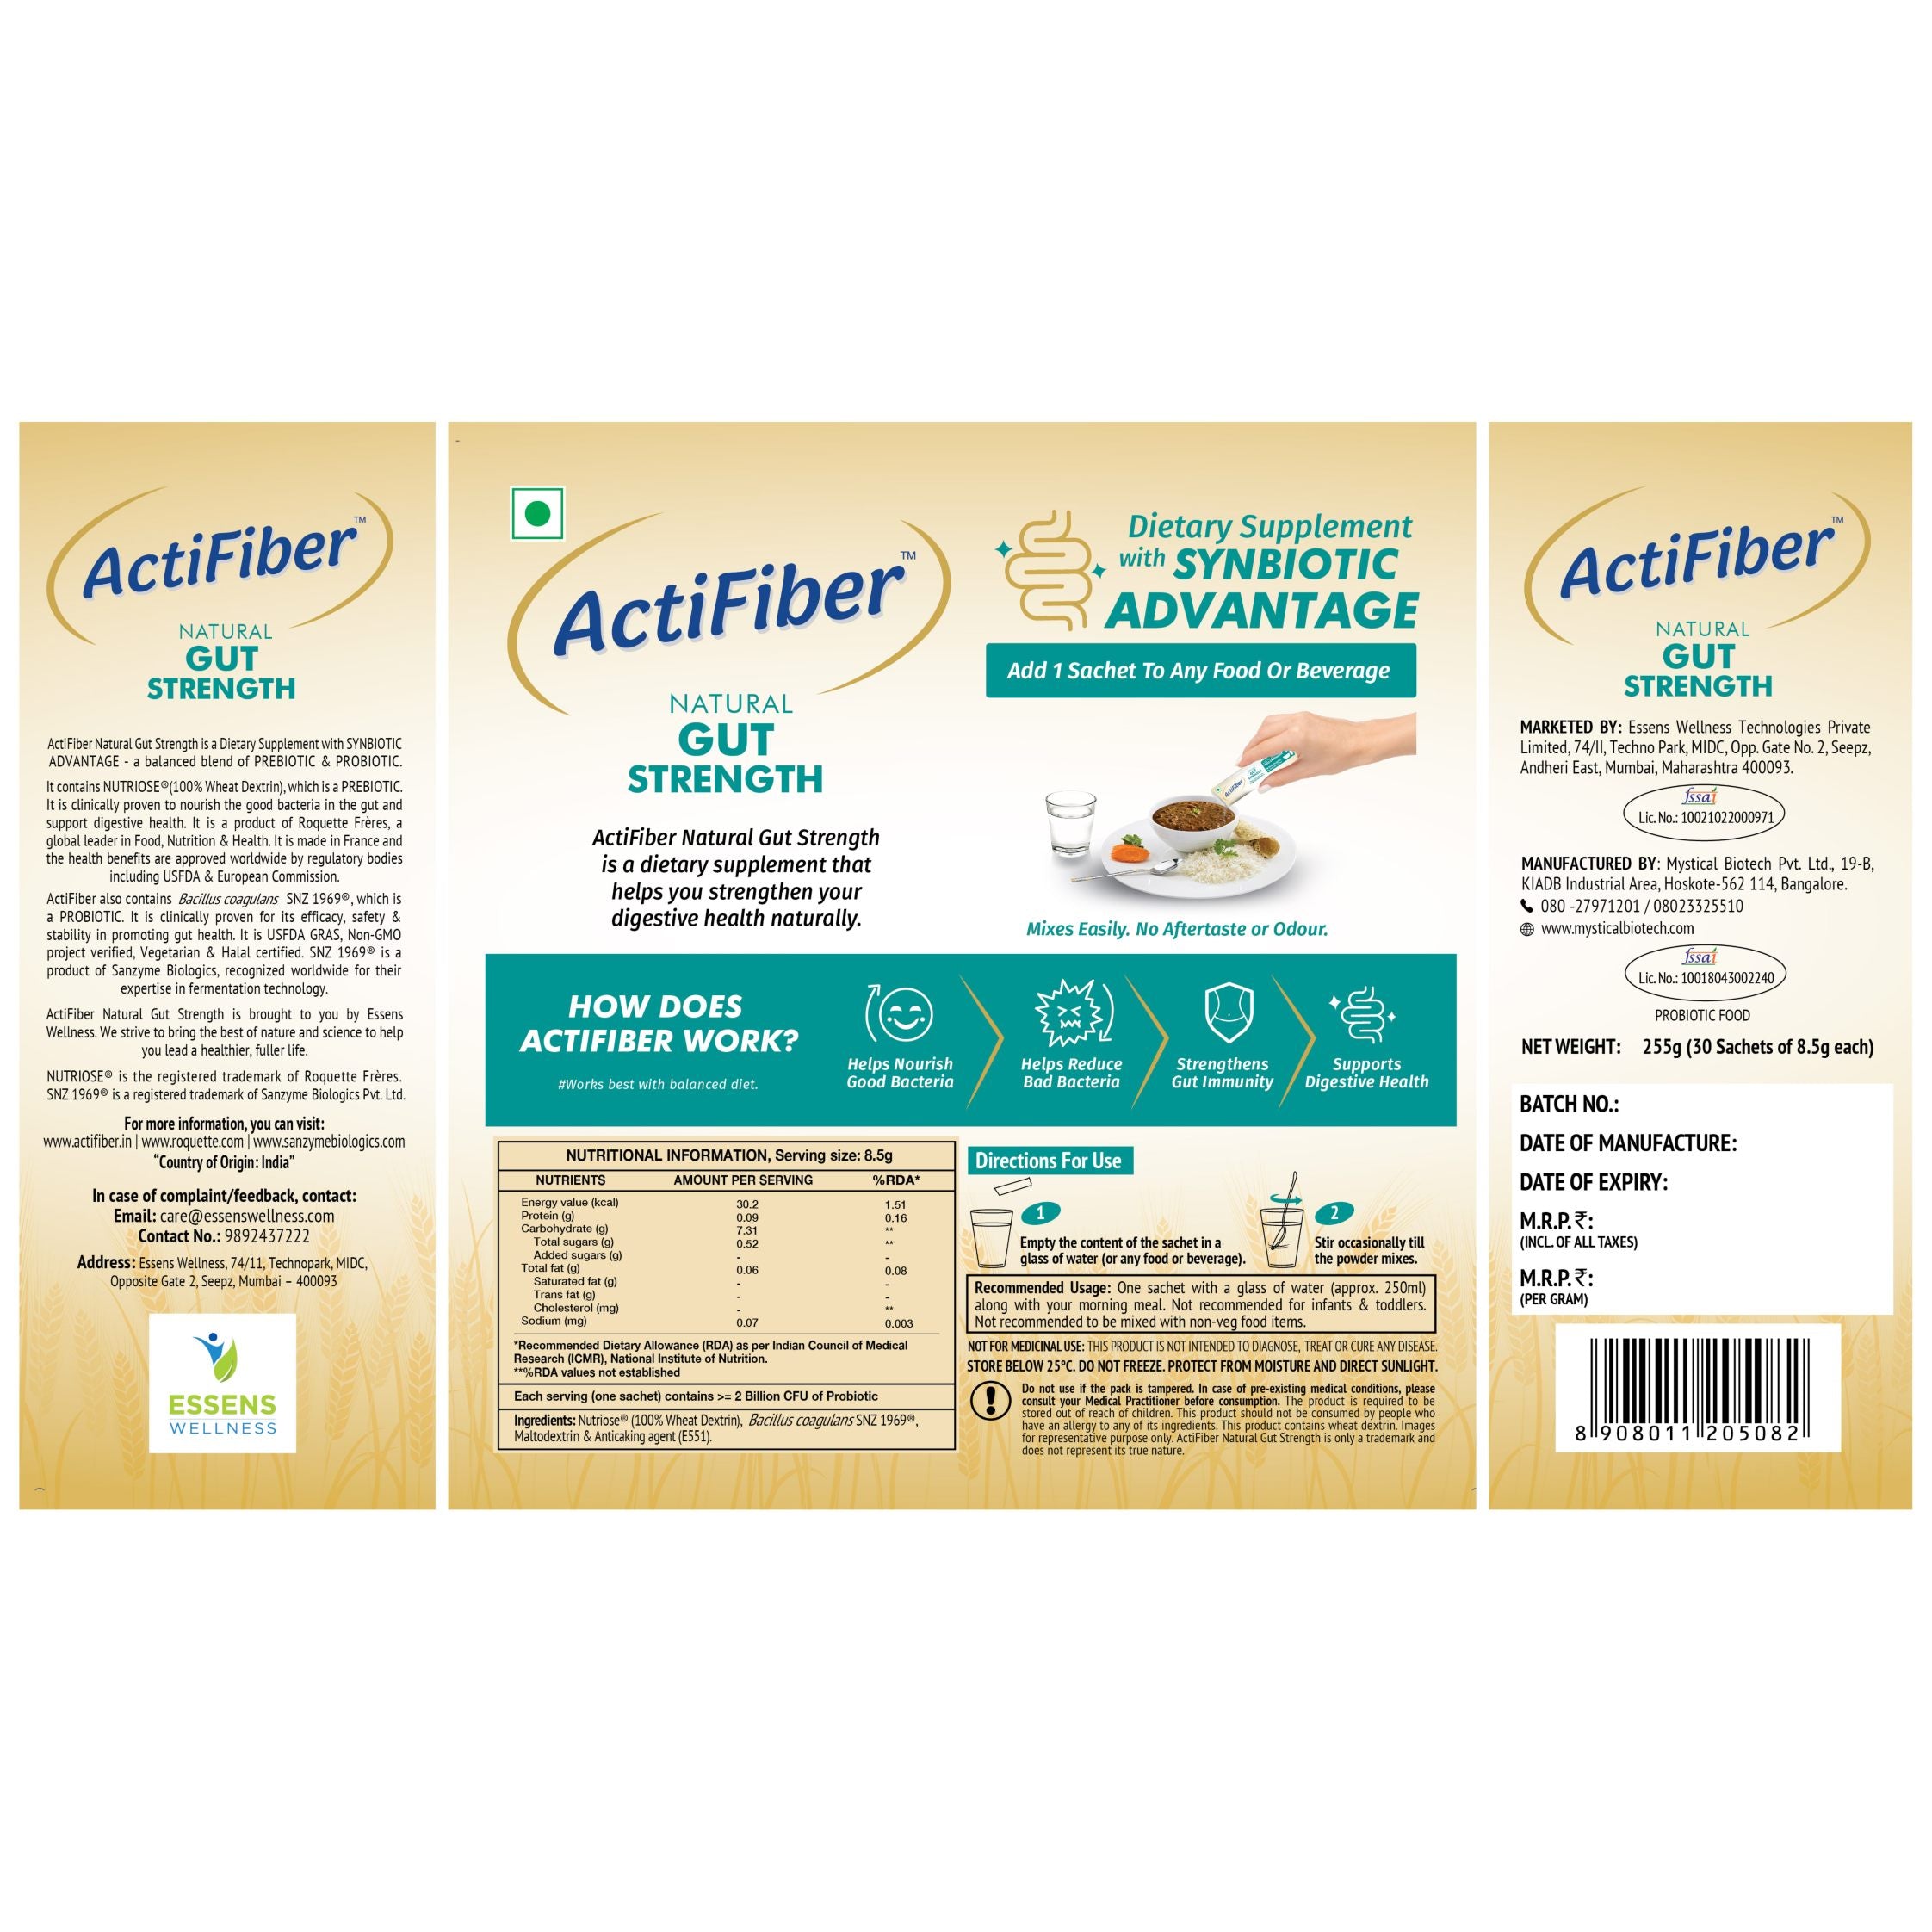 Actifiber Natural Gut Strength | Synbiotic Advantage | Prebiotics & Probiotics Supplement to Stronger Digestive Health | Effective Solution for Common Digestive problems, Gas, Constipation | (1 X 255 Gms Pack of 30 Sachets)